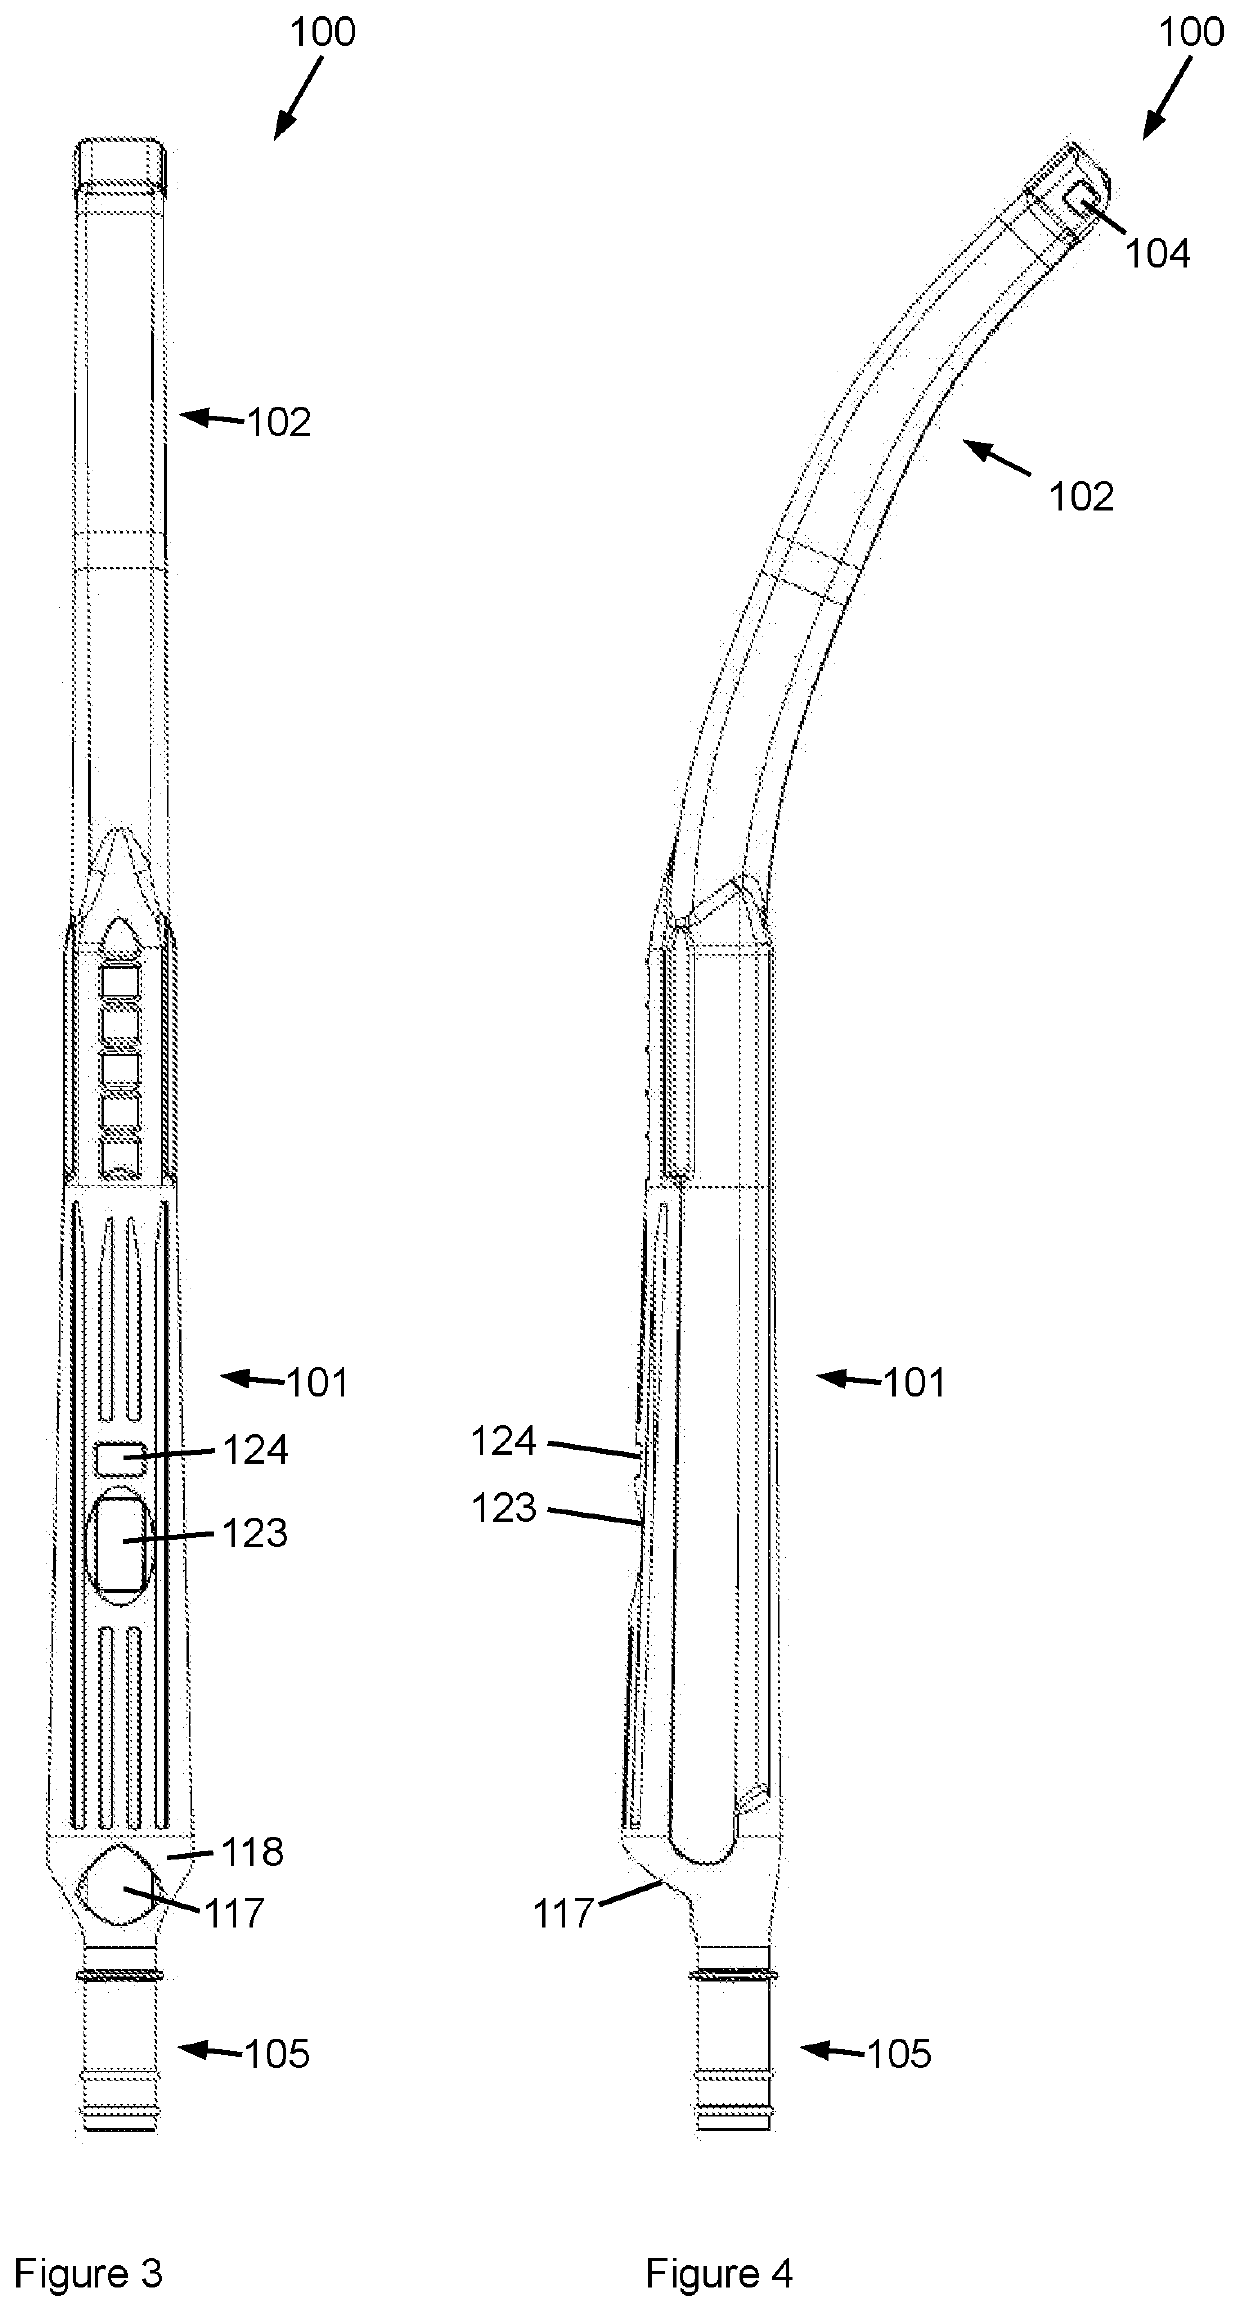 Diathermy tonsillectomy suction dissector apparatus